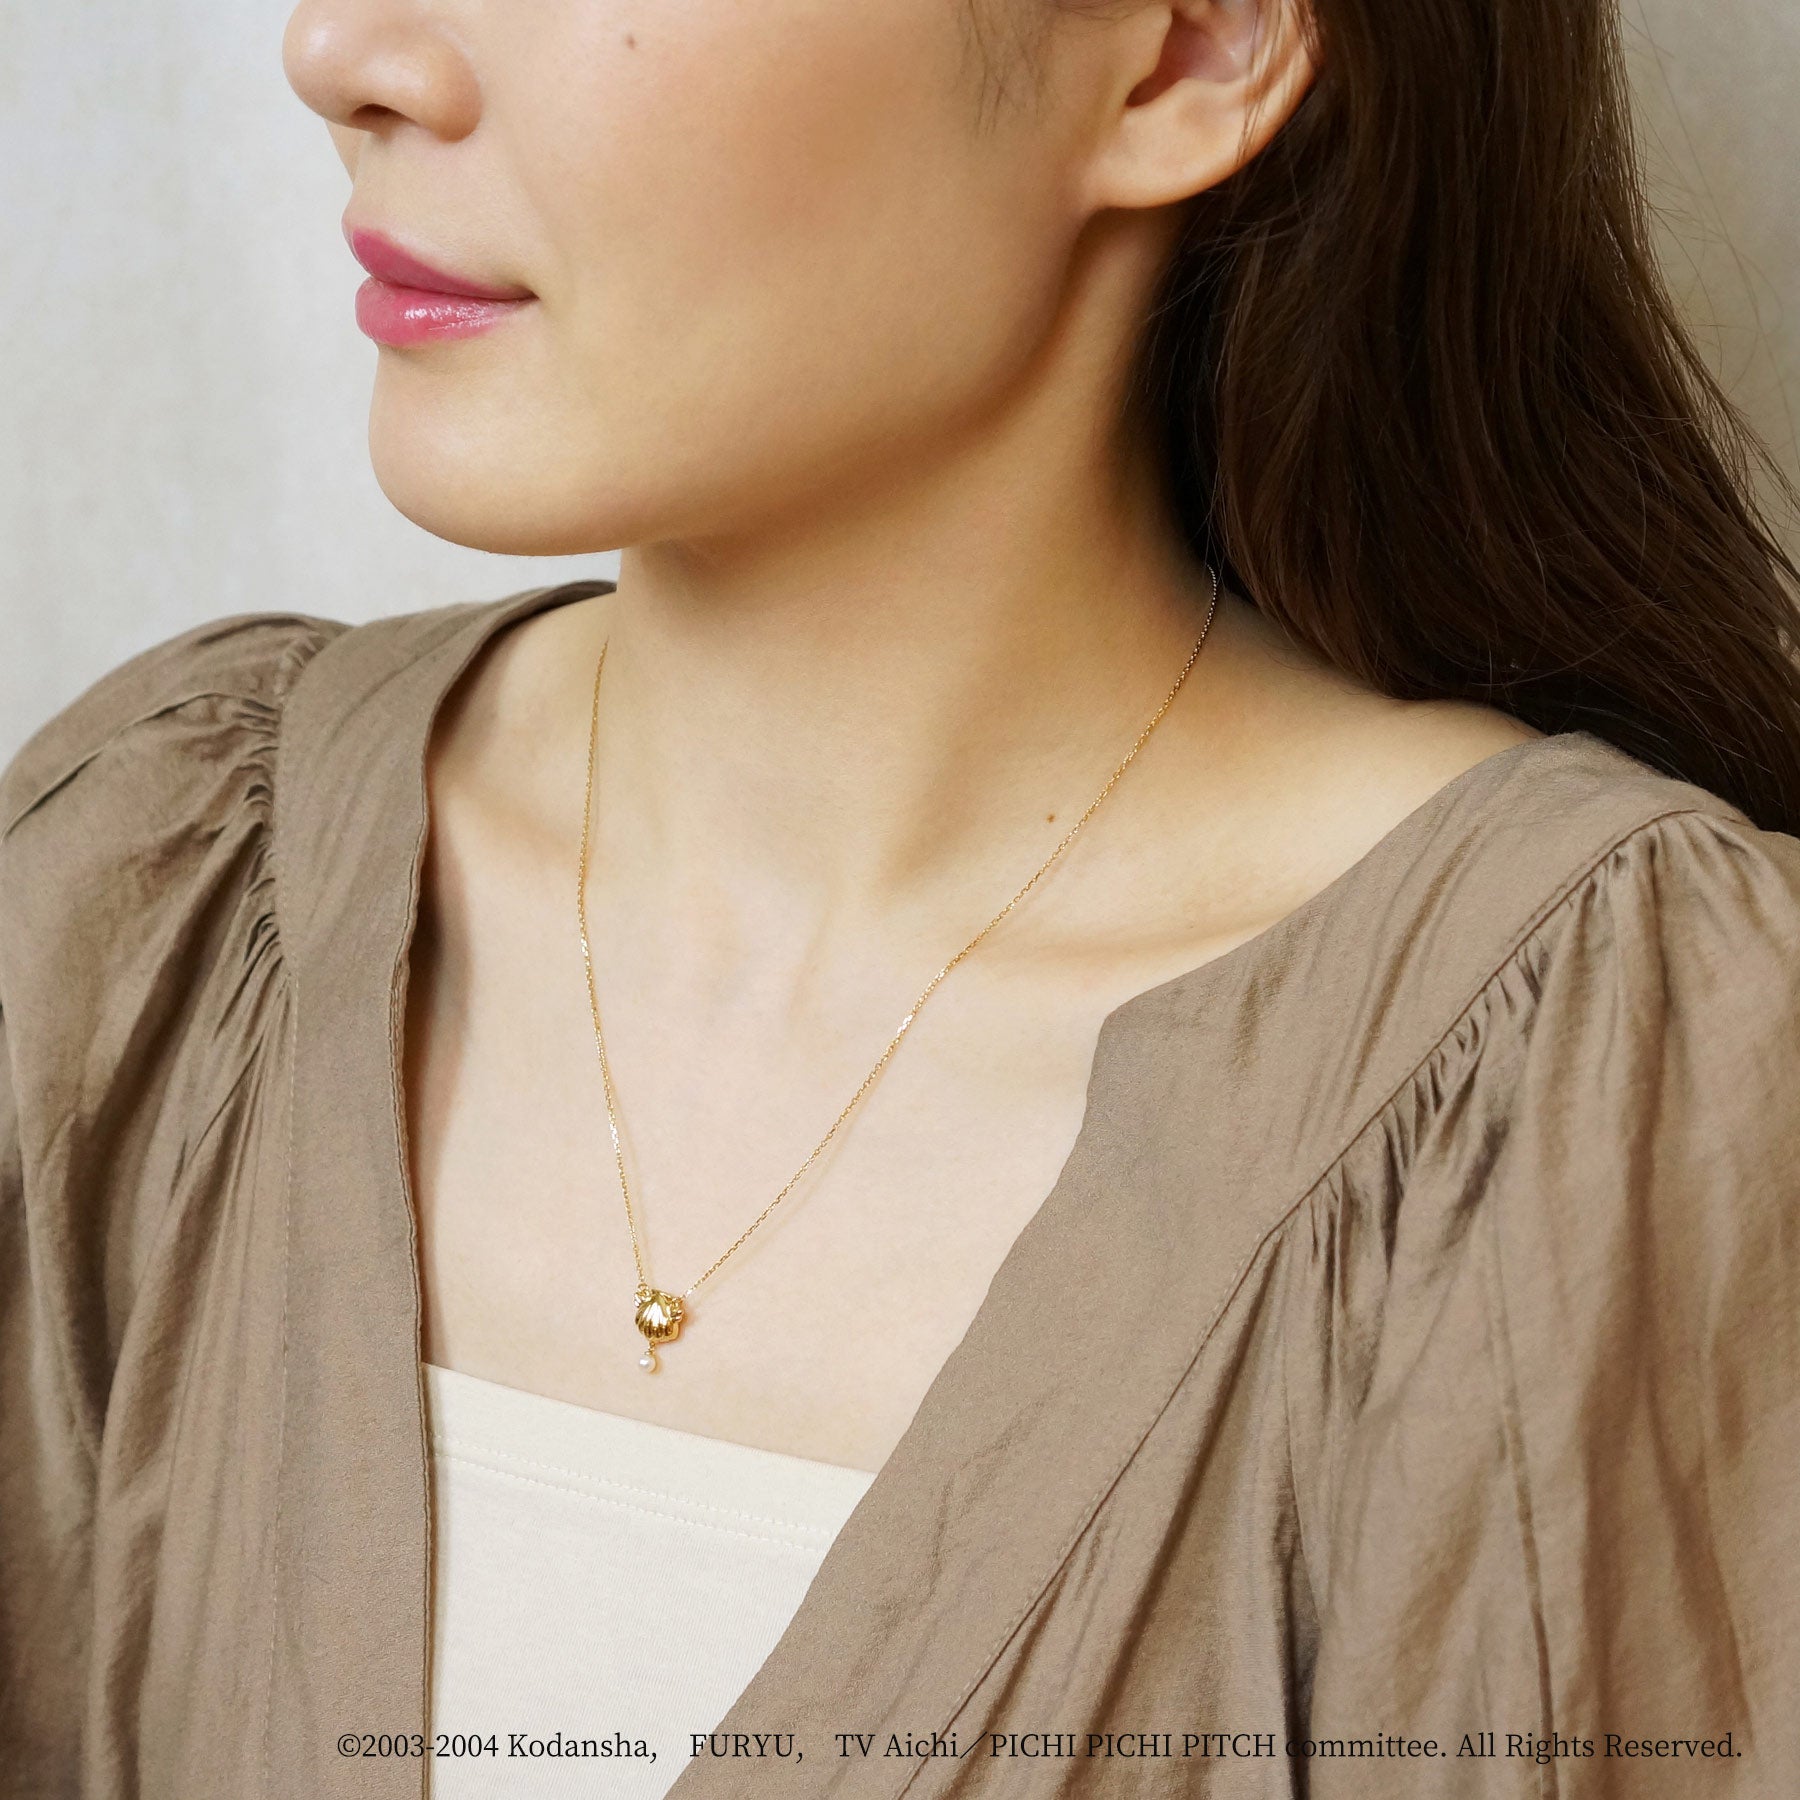 Mermaid Melody Pichi Pichi Pitch - Reversible Necklace (Rina Toin) - Model Image